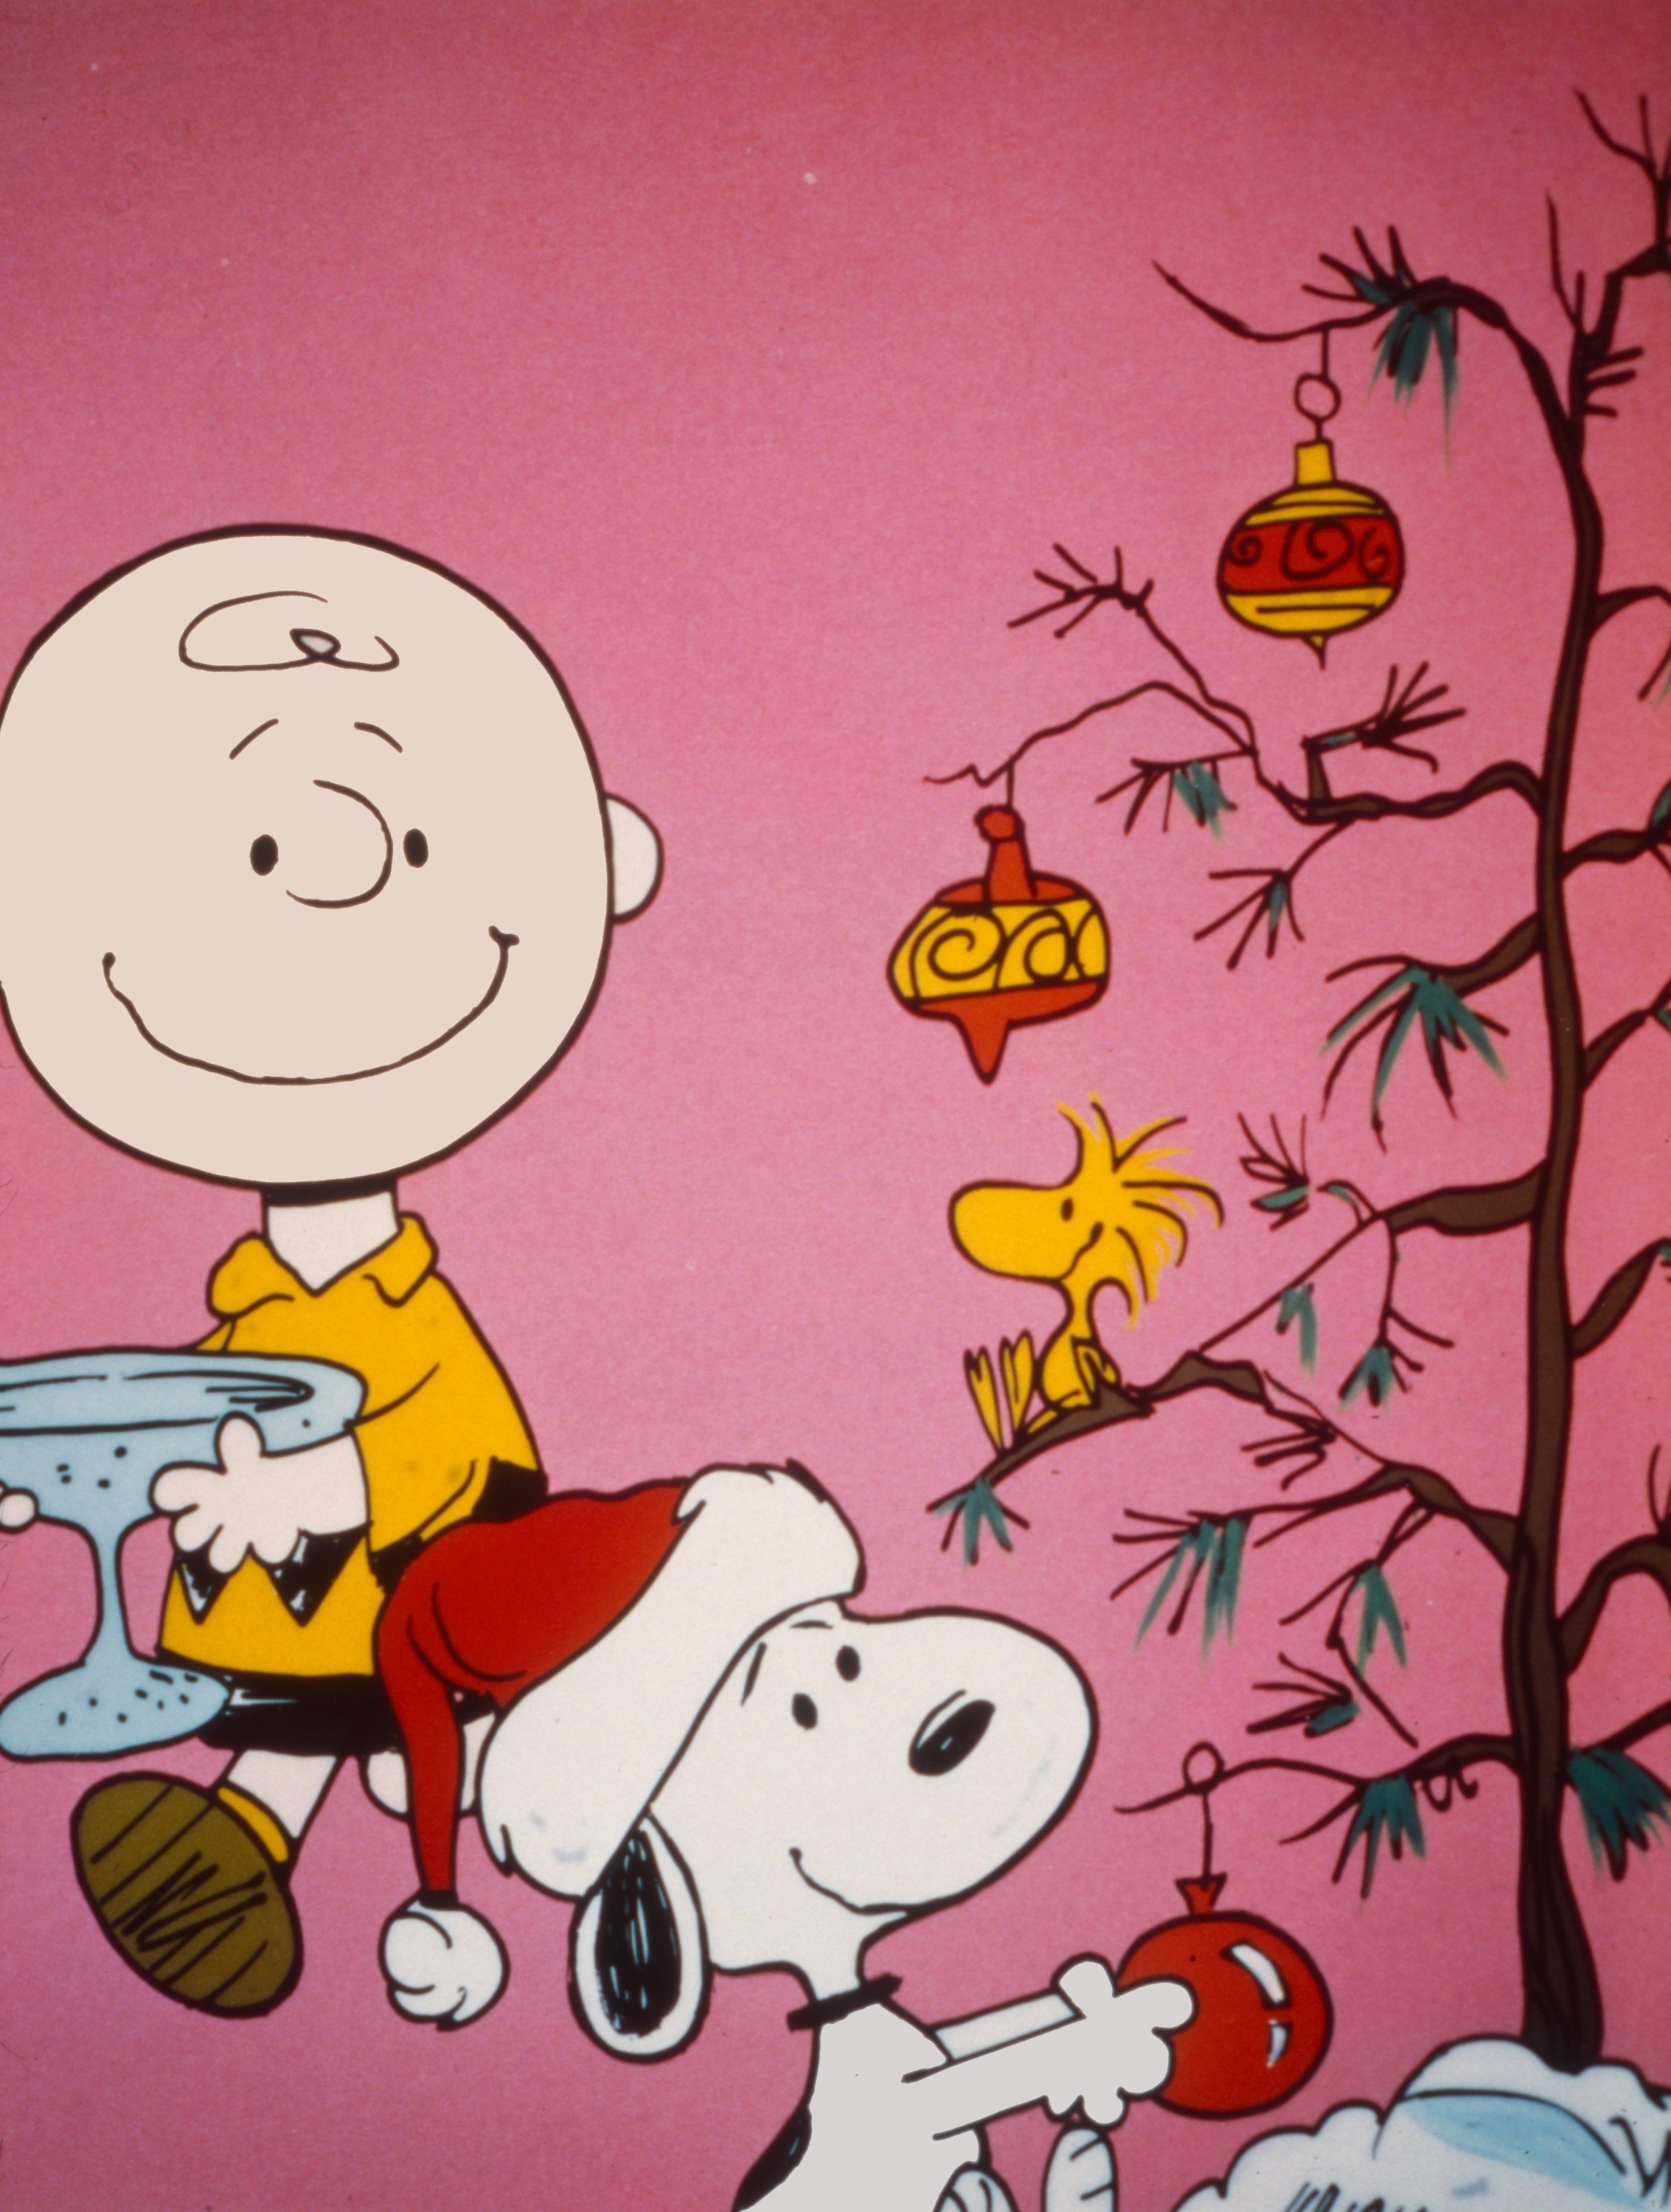 Snoopy and Charlie decorating their Christmas tree